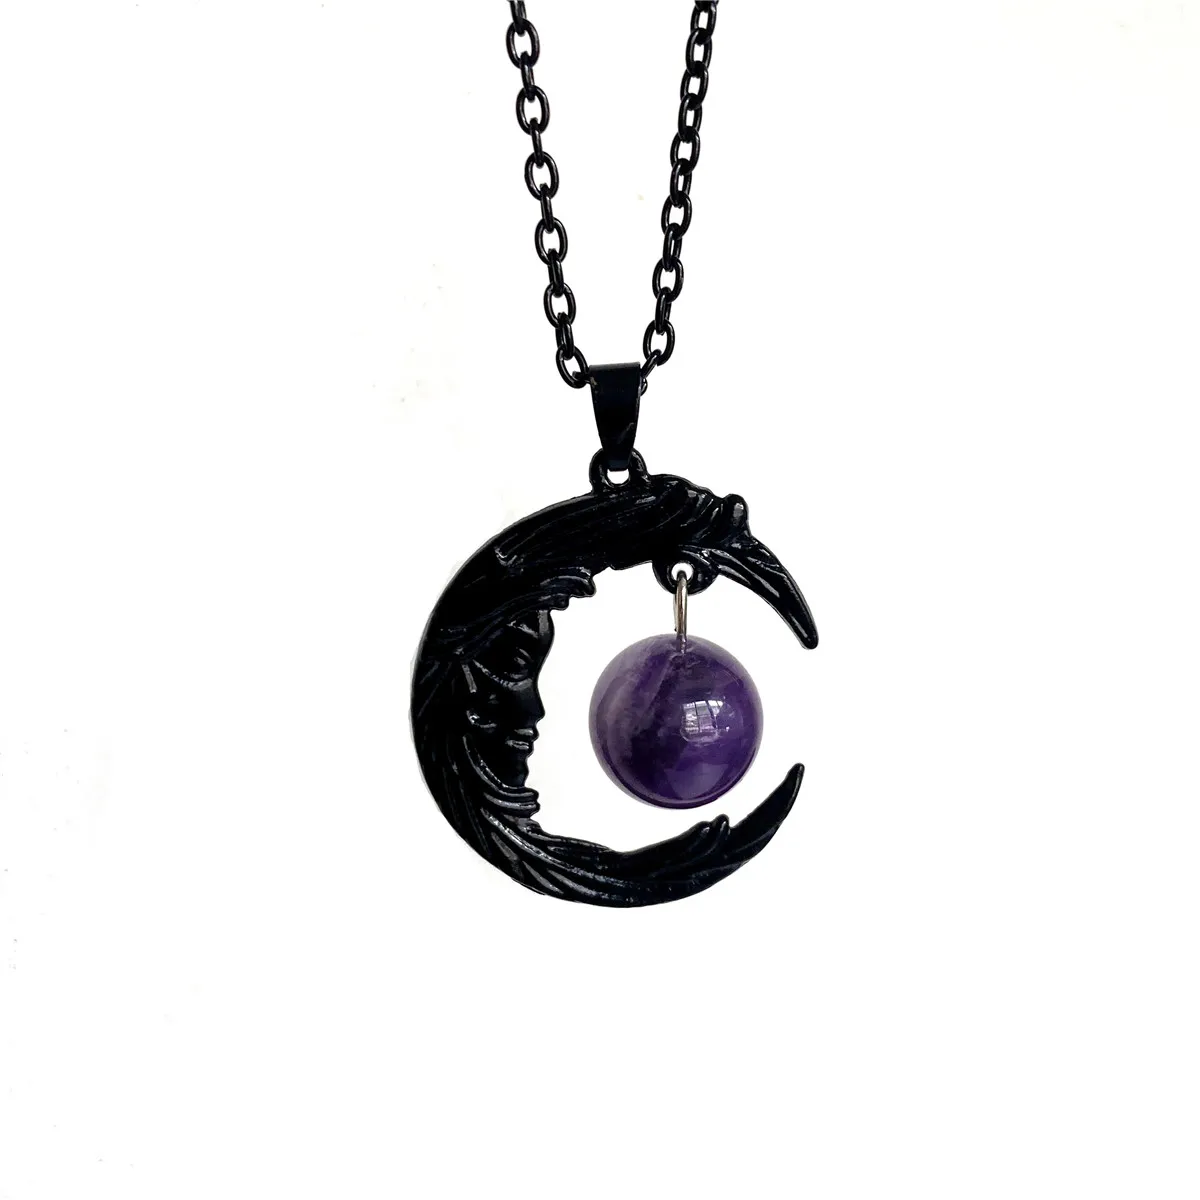 

Purple Crystal Moon Necklace Crescent Moon Jewelry Dark Style Gothic Stone Pendant Magic Wiccan Witch Style Macabre Amulet